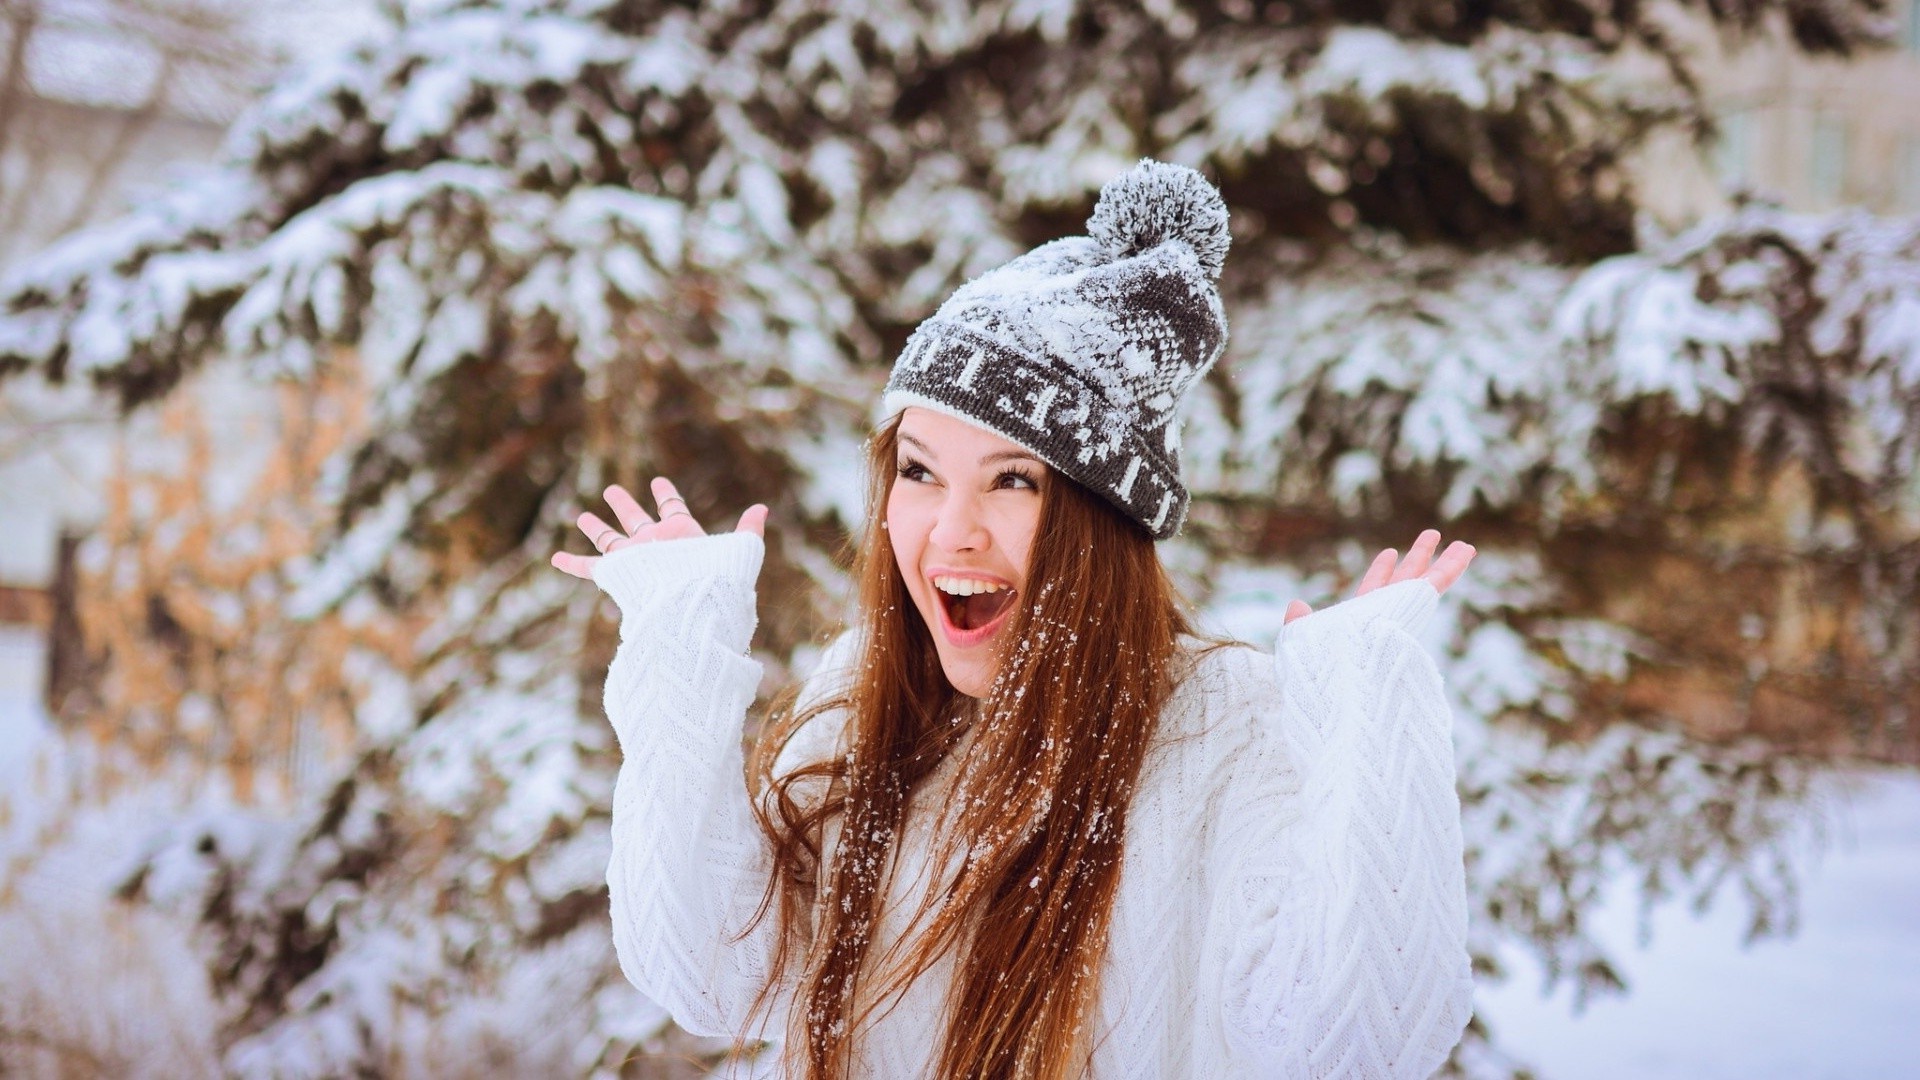 women, Model, Redhead, Long Hair, Women Outdoors, Hat, Open Mouth, Nature, Winter, Snow, Pine Trees, Sweater, Looking Up, Screaming Wallpaper